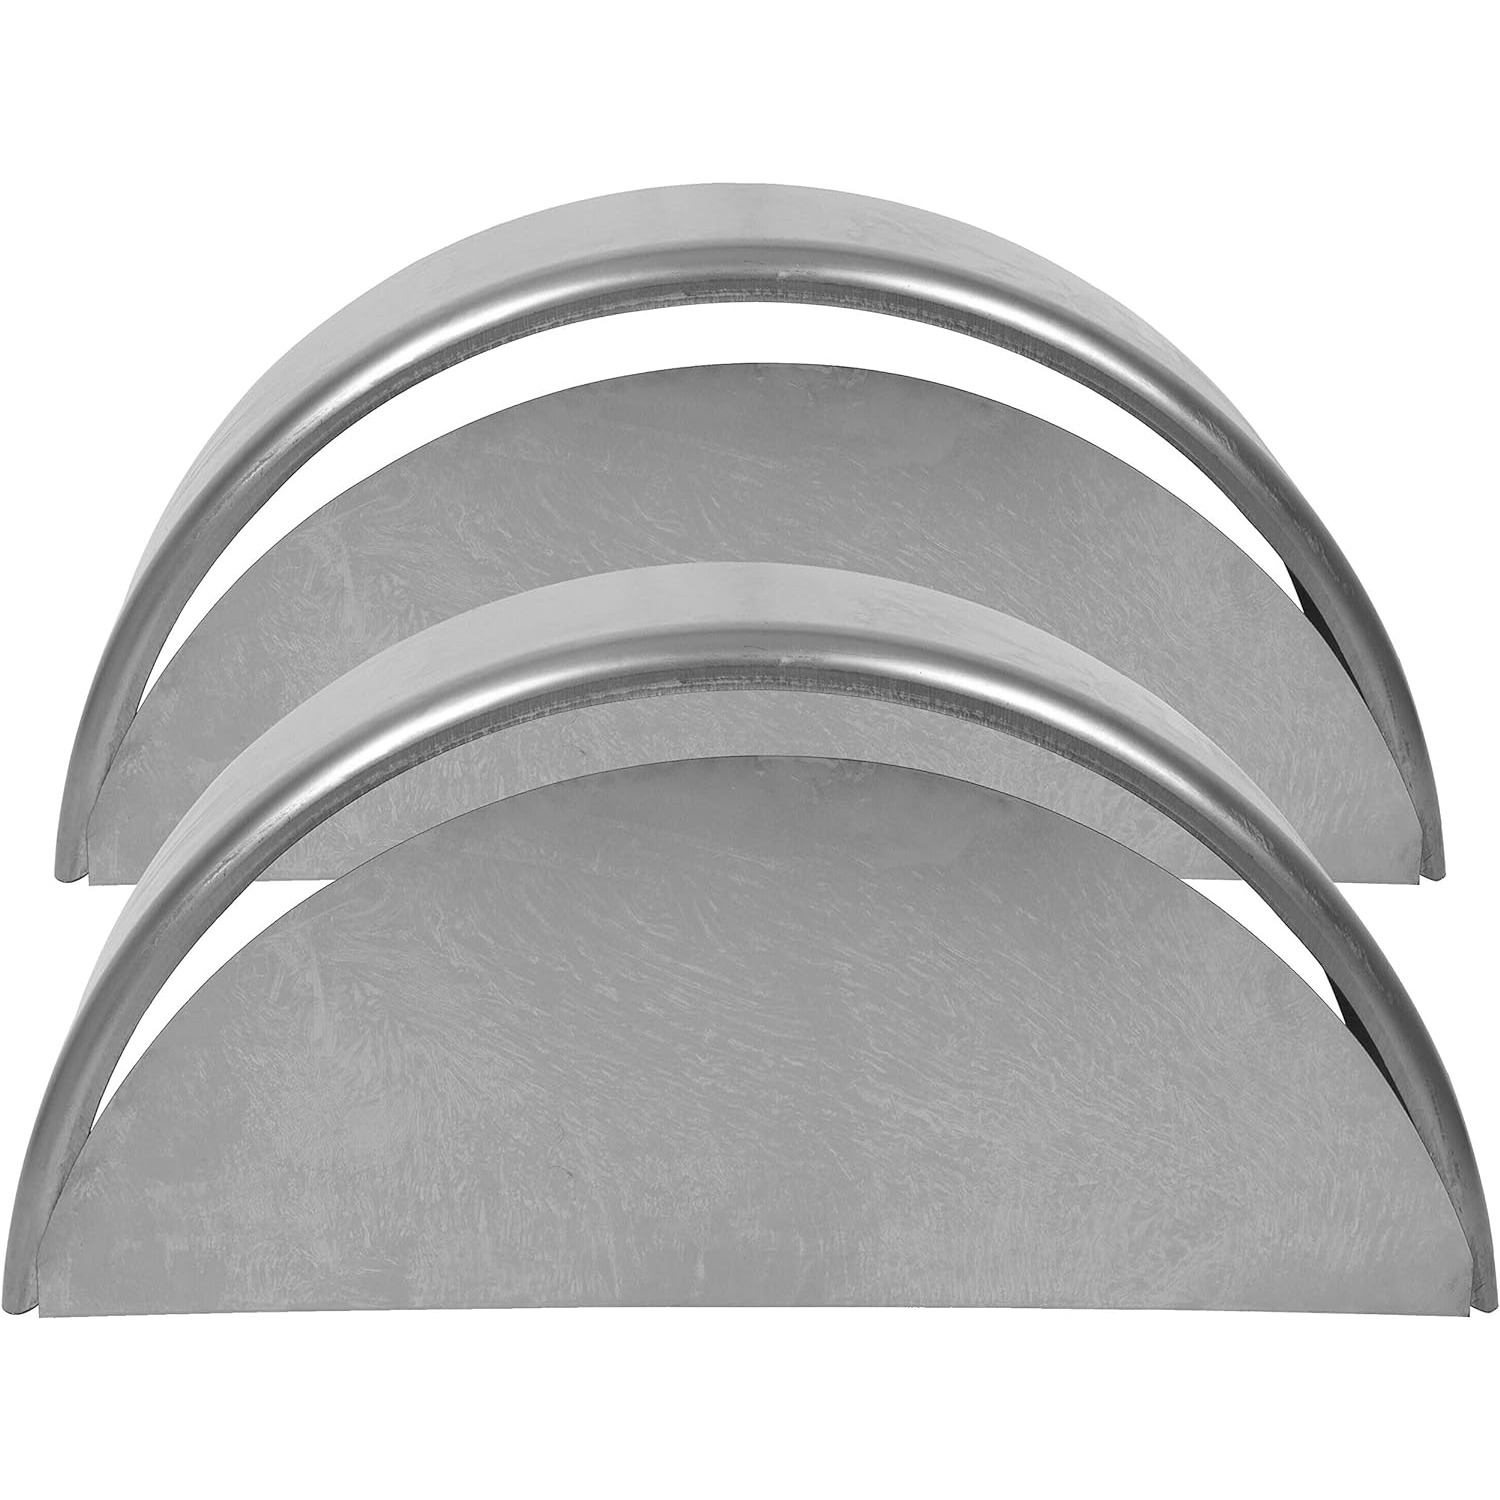 

Round Trailer Fenders With Fender Backs Compatible With 14 To 16 Inch Wheels